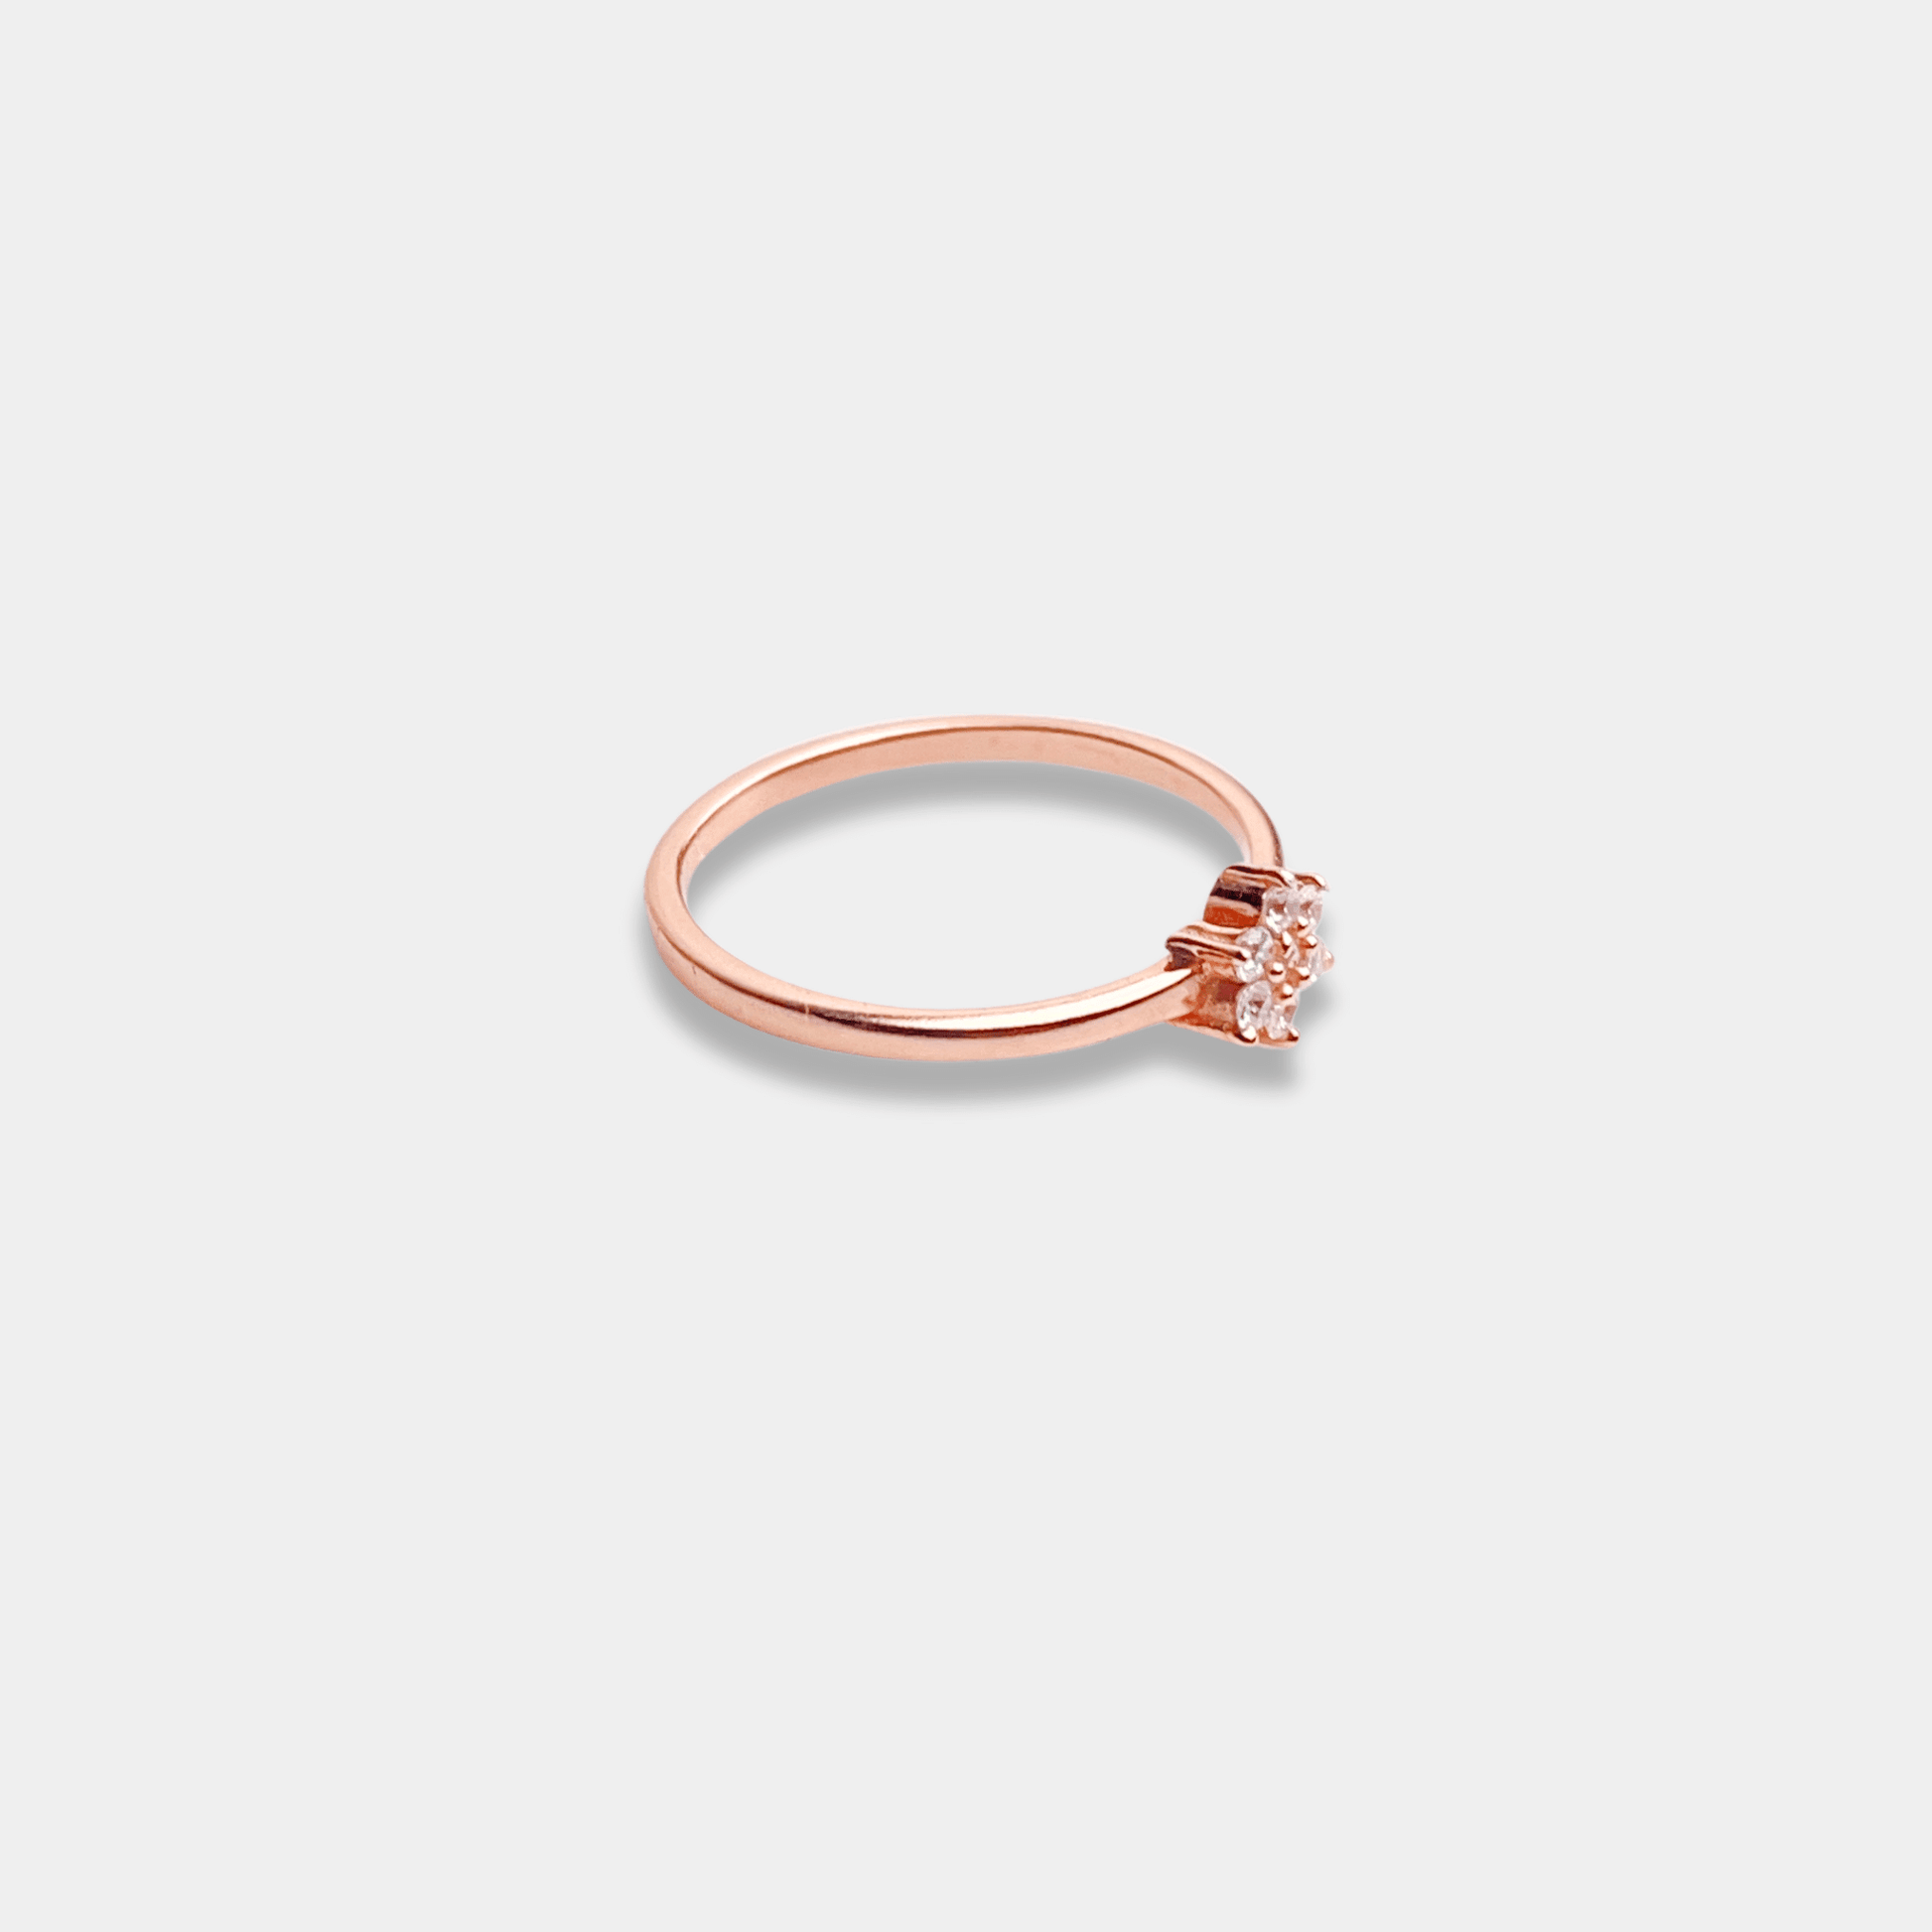 A sterling silver ring with a petite diamond nestled in the center, beautifully crafted in rose gold.A sterling silver ring with a petite diamond nestled in the center, beautifully crafted in rose gold.